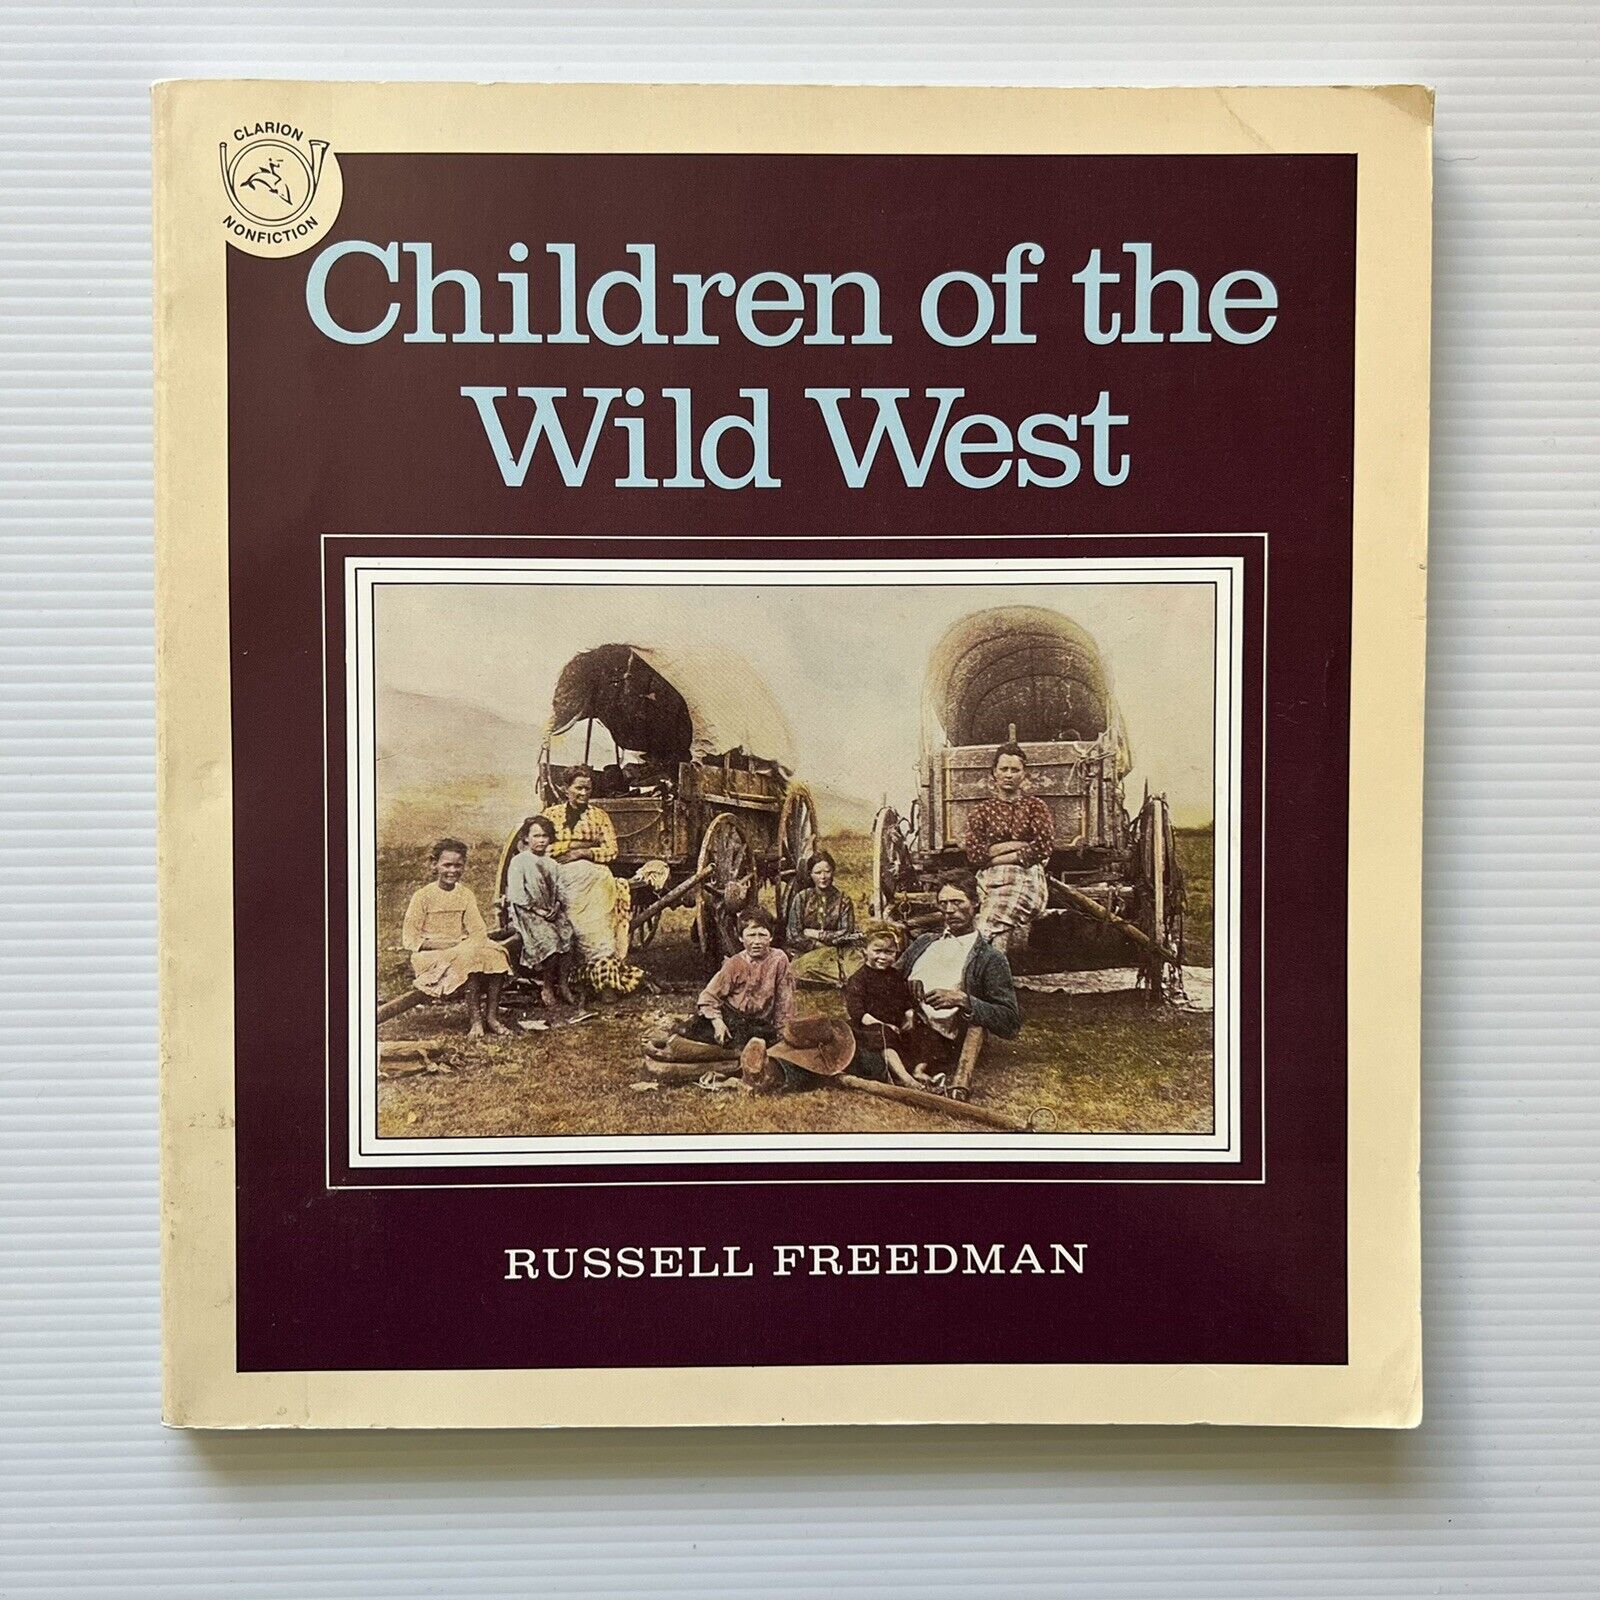 Children of the Wild West by Russell Freedman Wild West Photography PB 1983